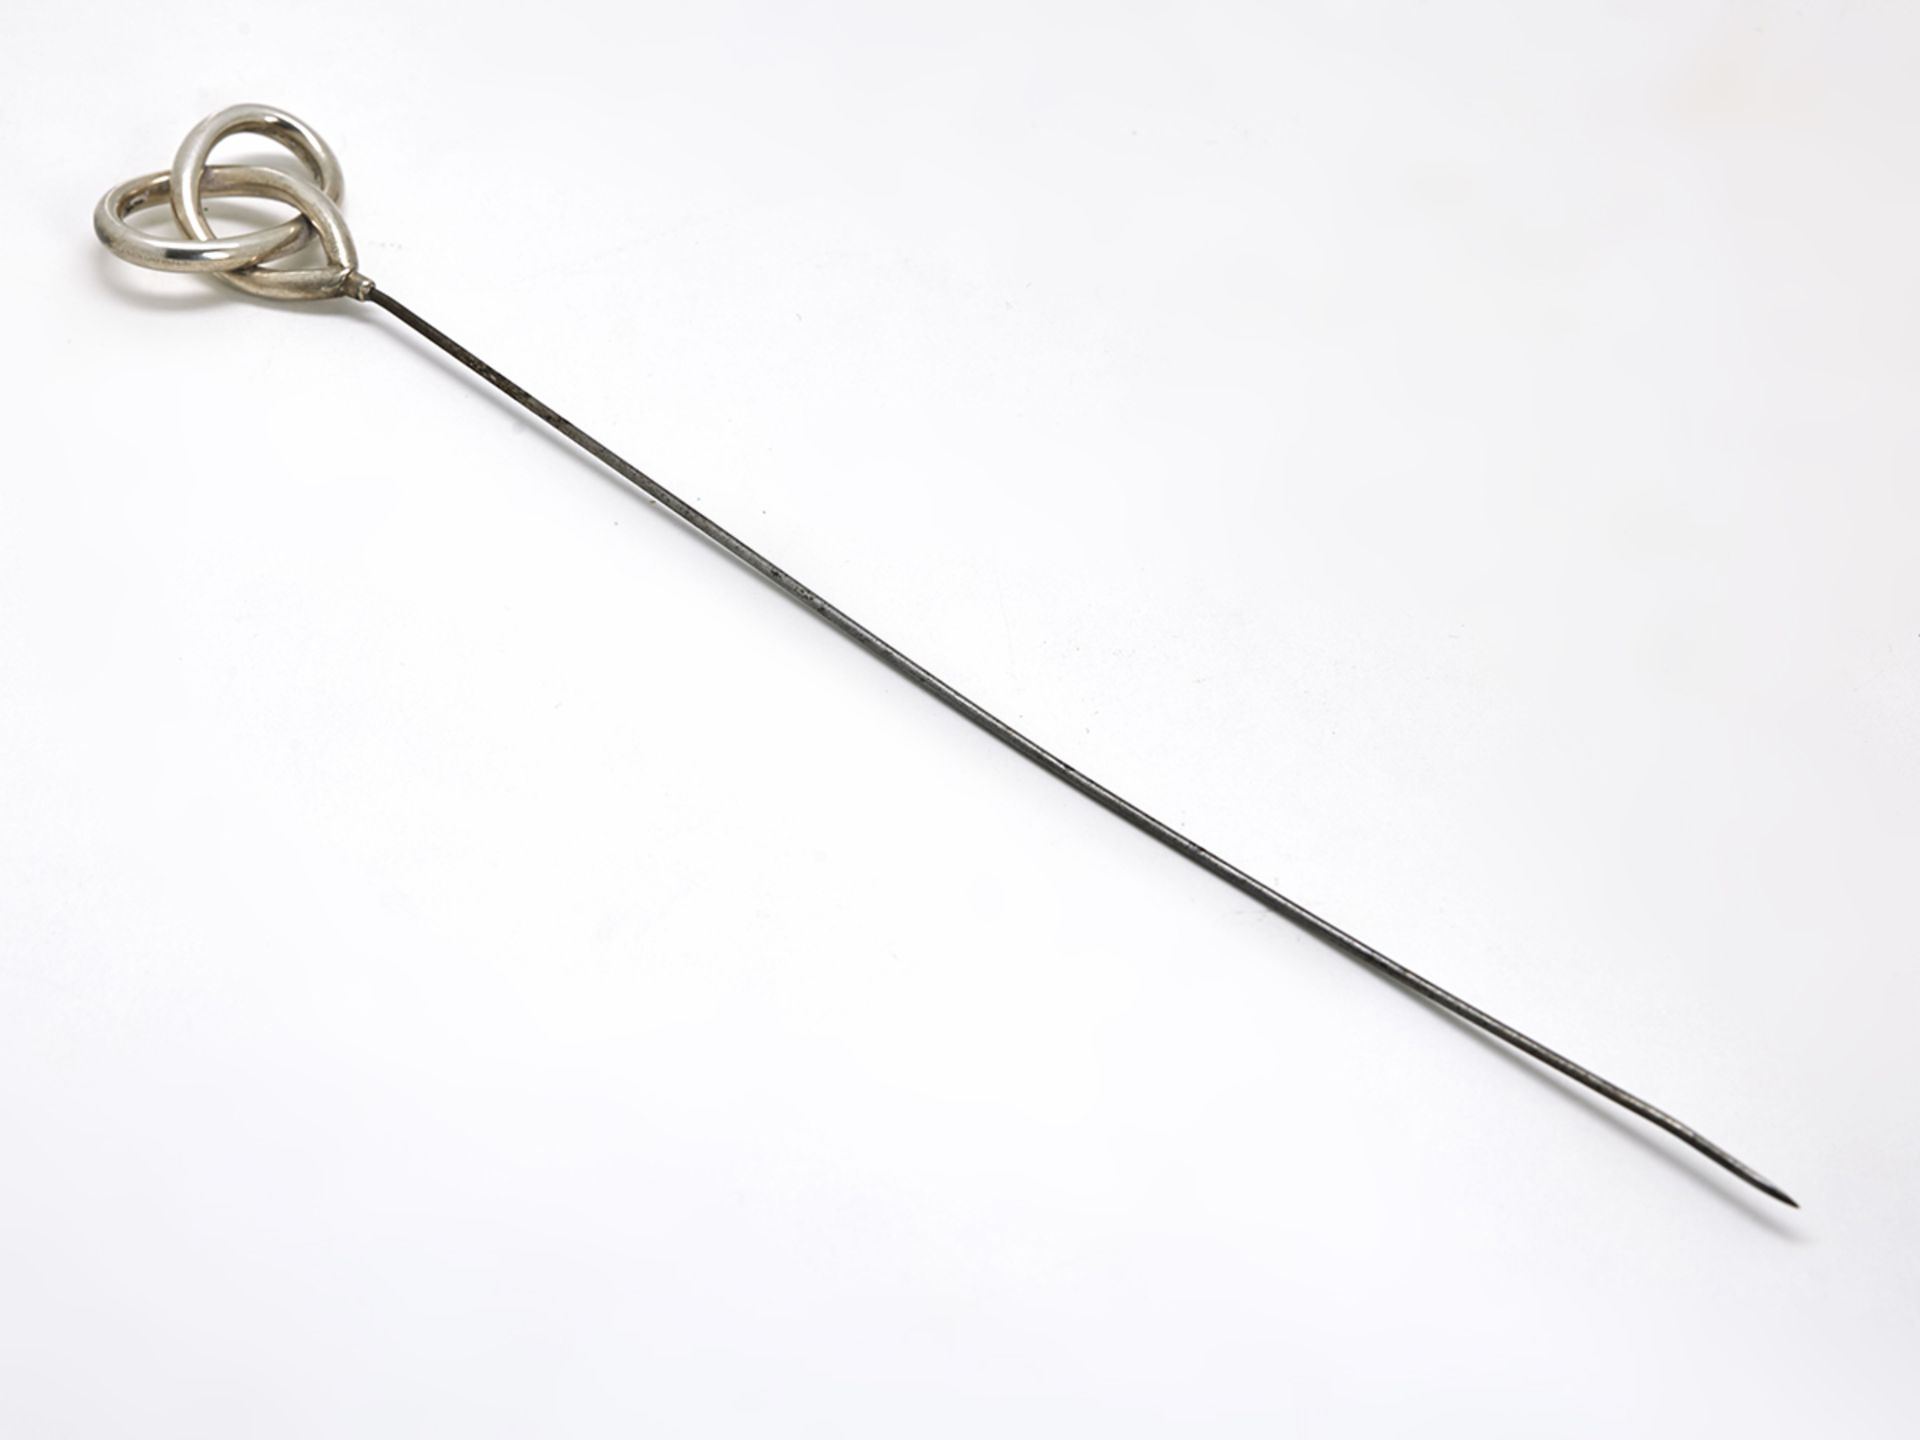 ART NOUVEAU CHARLES HORNER LARGE KNOT SILVER HATPIN c.1910   DIMENSIONS   Length 25cm   CONDITION - Image 2 of 3